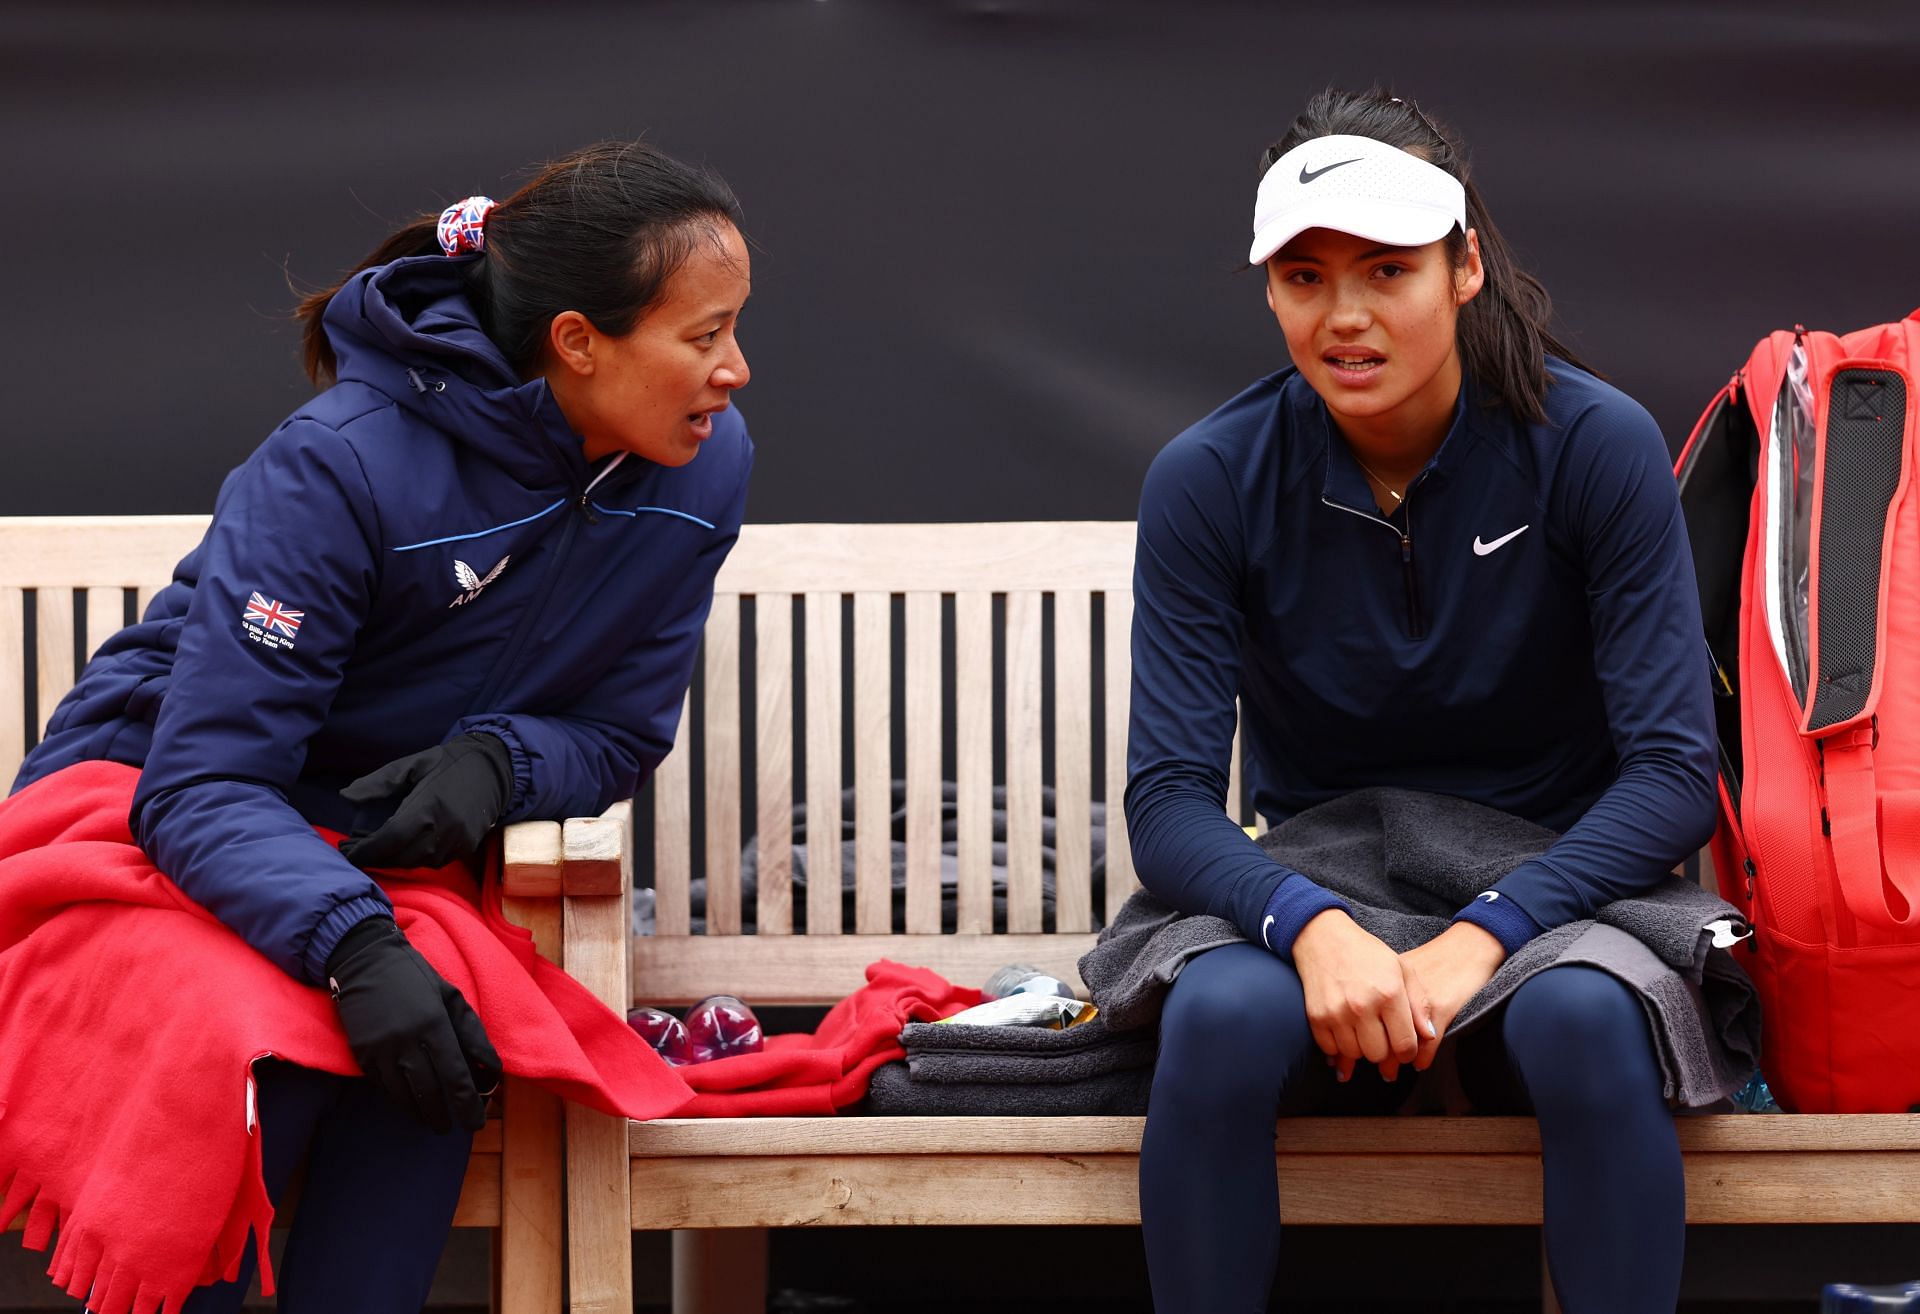 Anne Keothavong and Emma Raducanu in a conversation during the Billie Jean King Cup playoff match between Great Britain and the Czech Republic.